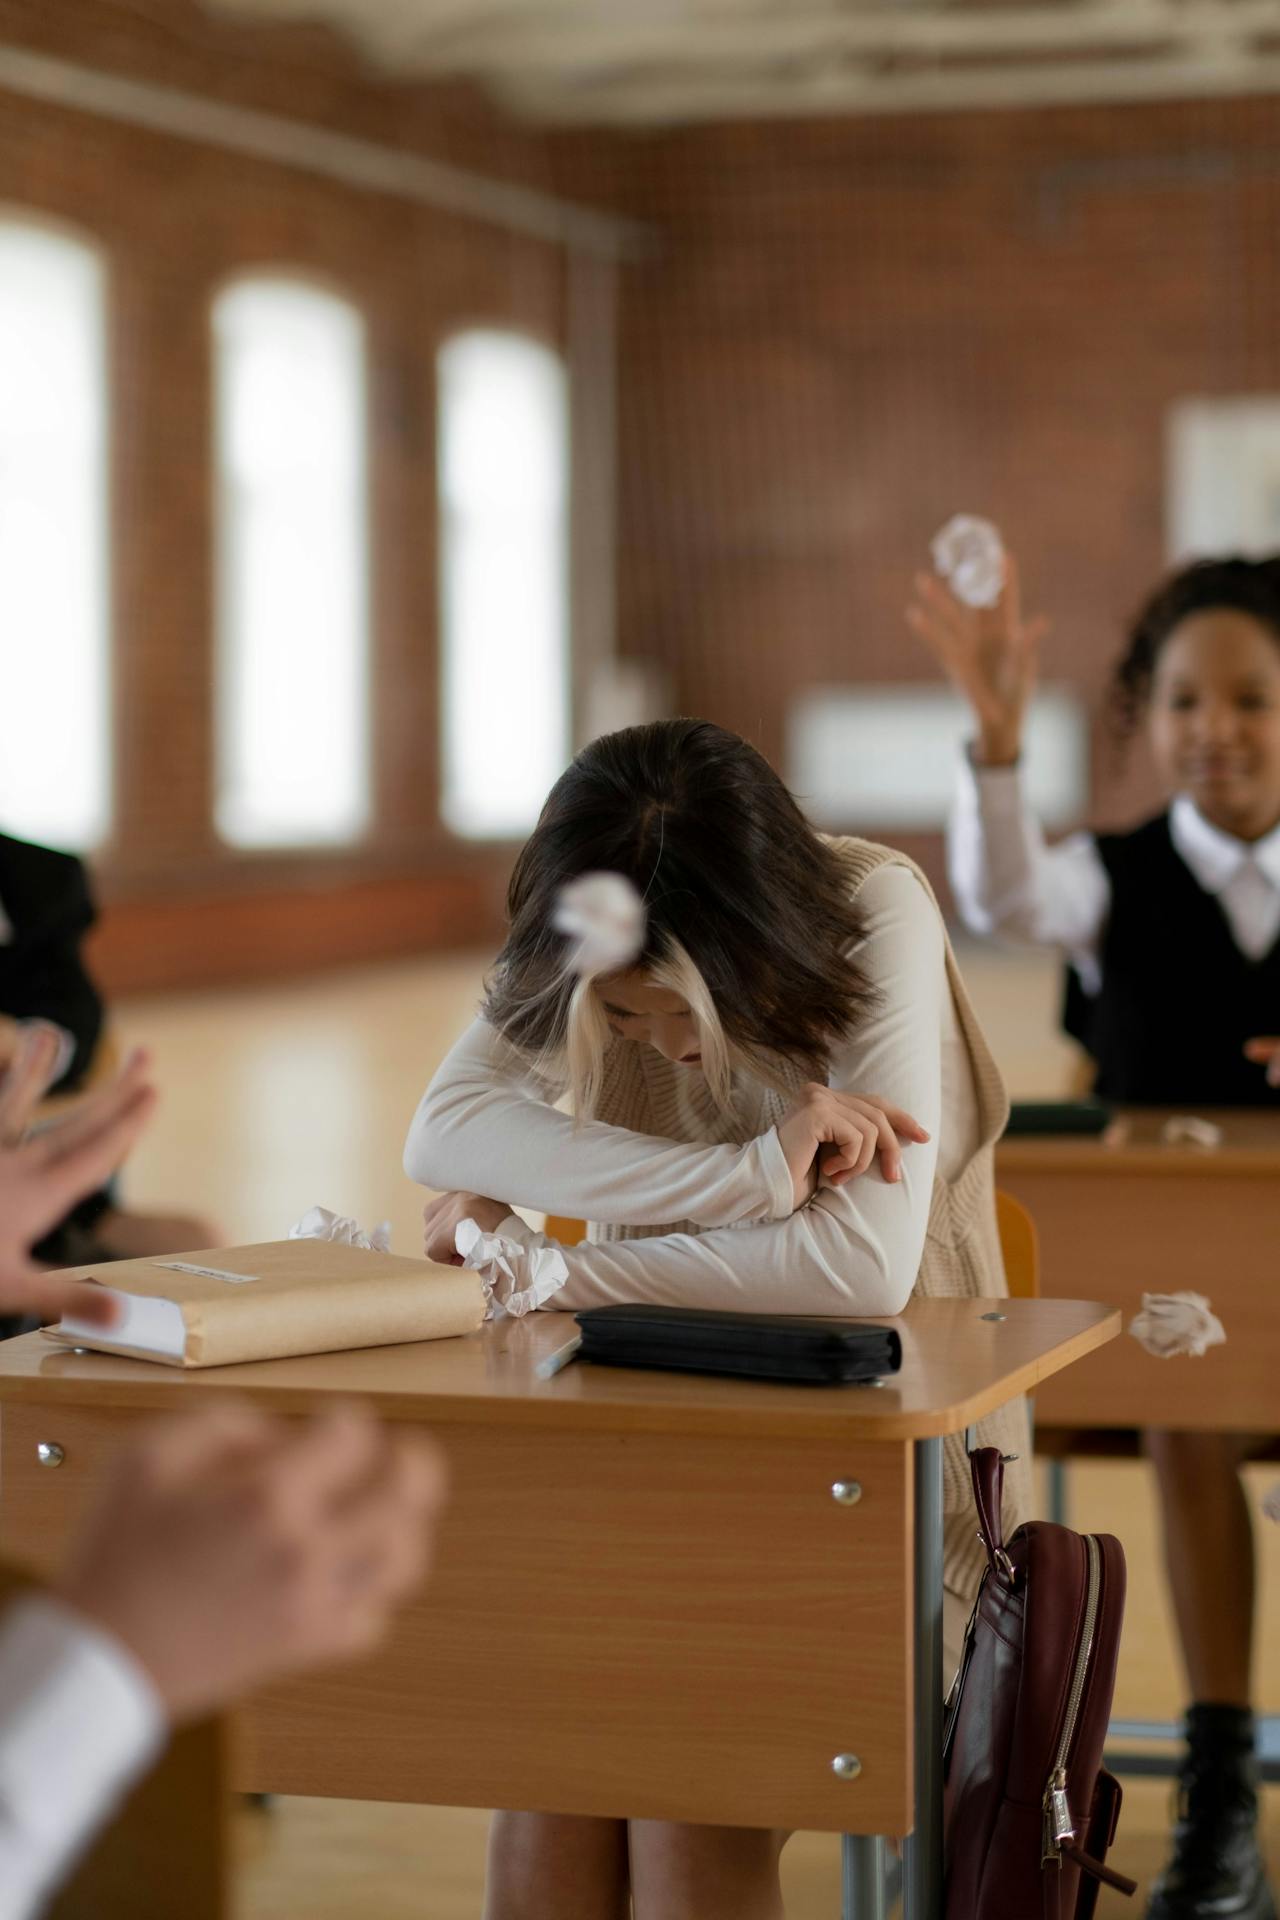 'You don't look Chinese': How bullying shaped a student's identity